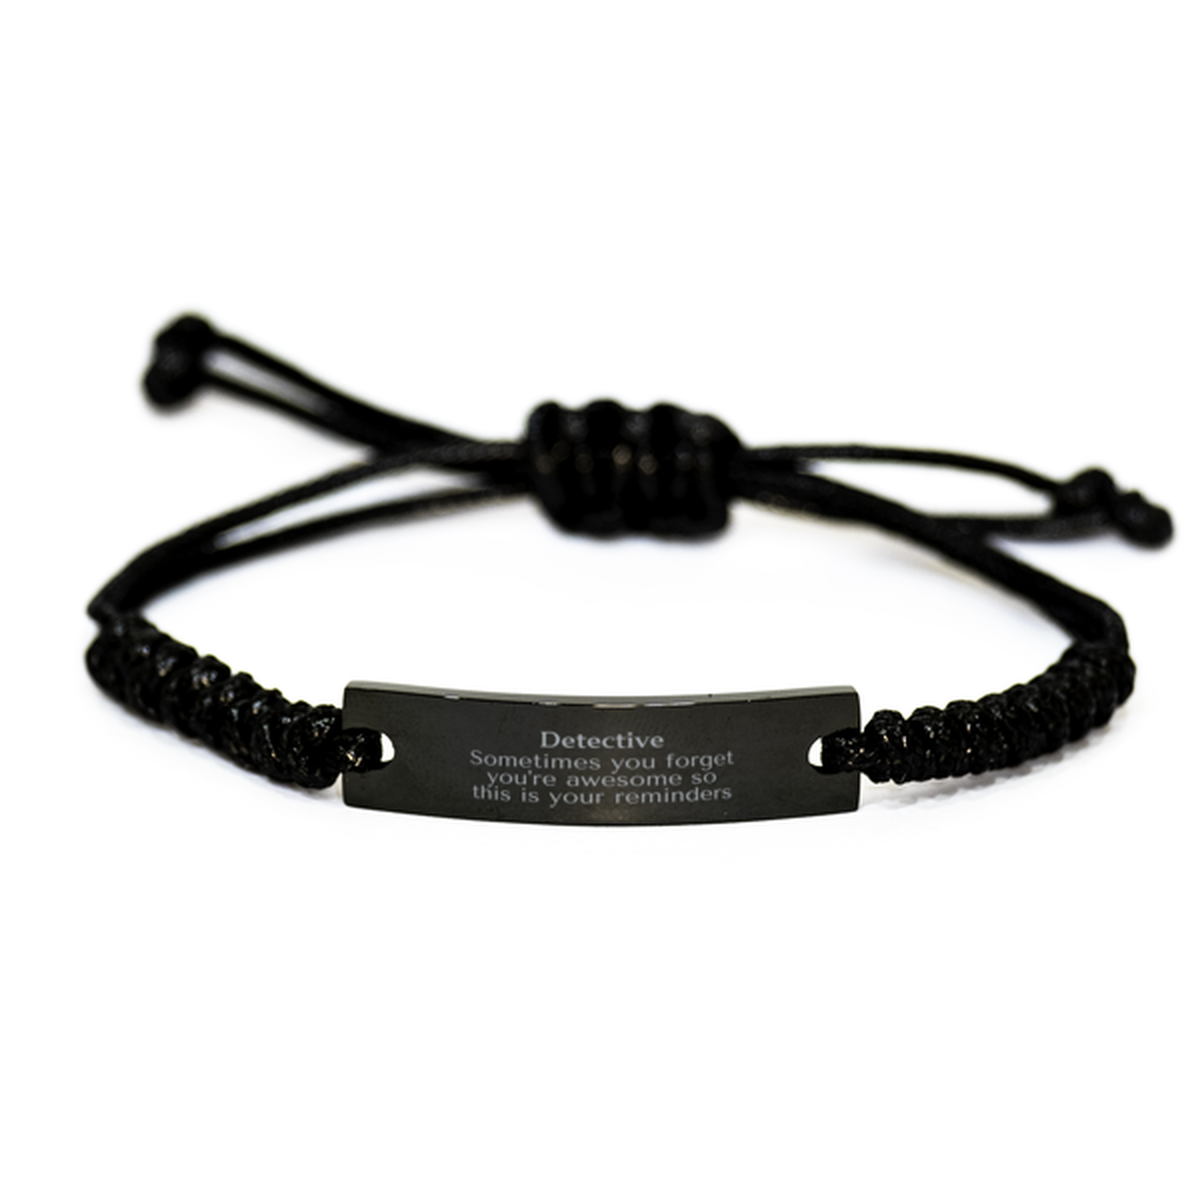 Sentimental Detective Black Rope Bracelet, Detective Sometimes you forget you're awesome so this is your reminders, Graduation Christmas Birthday Gifts for Detective, Men, Women, Coworkers